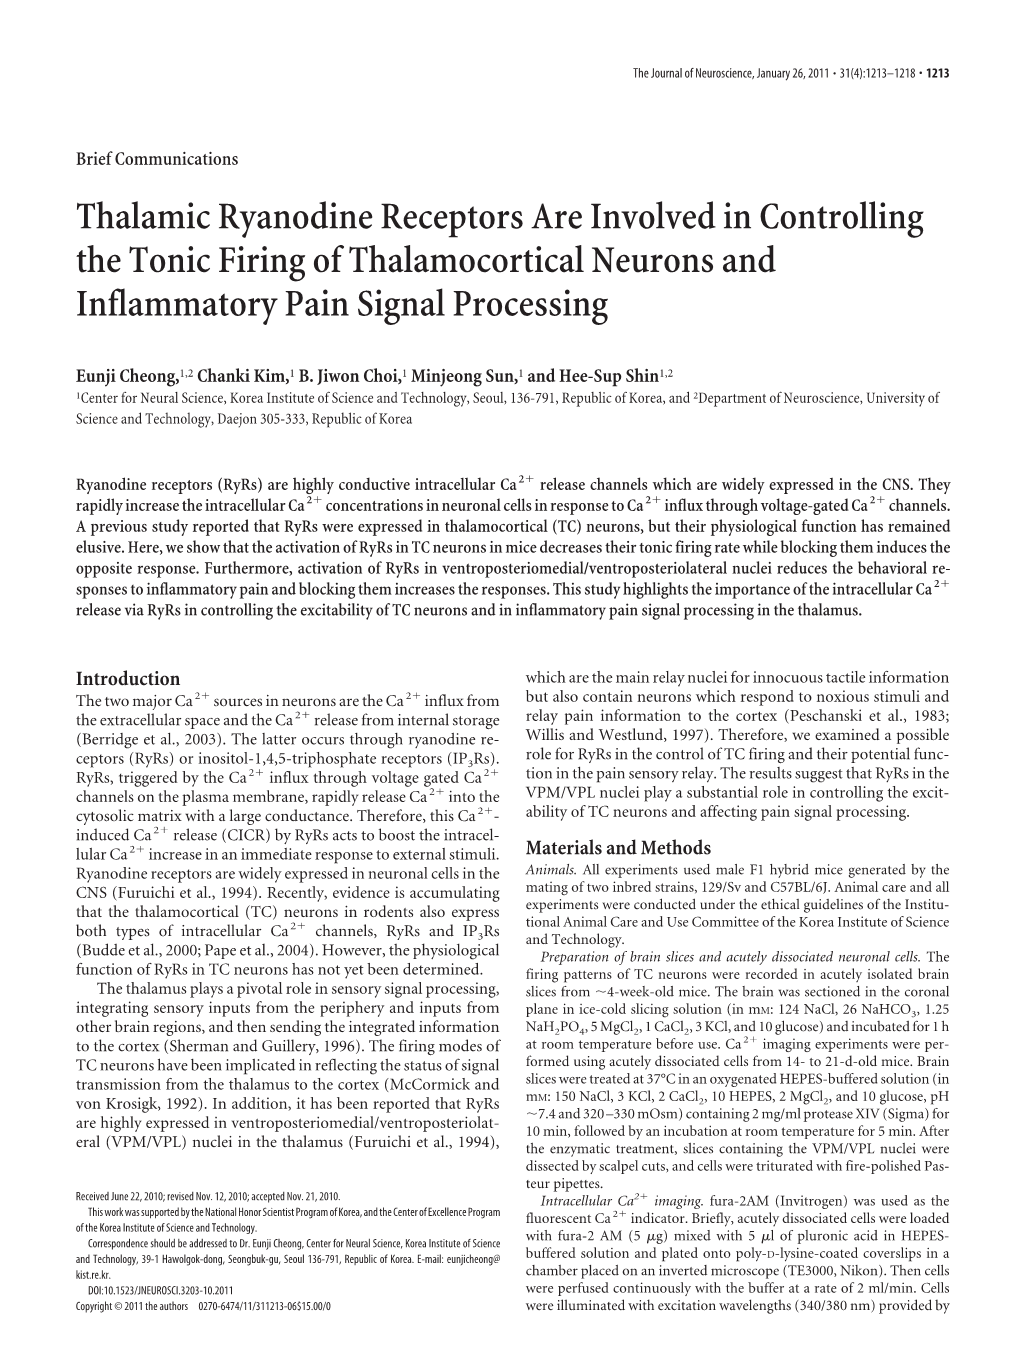 Thalamic Ryanodine Receptors Are Involved in Controlling the Tonic Firing of Thalamocortical Neurons and Inflammatory Pain Signal Processing